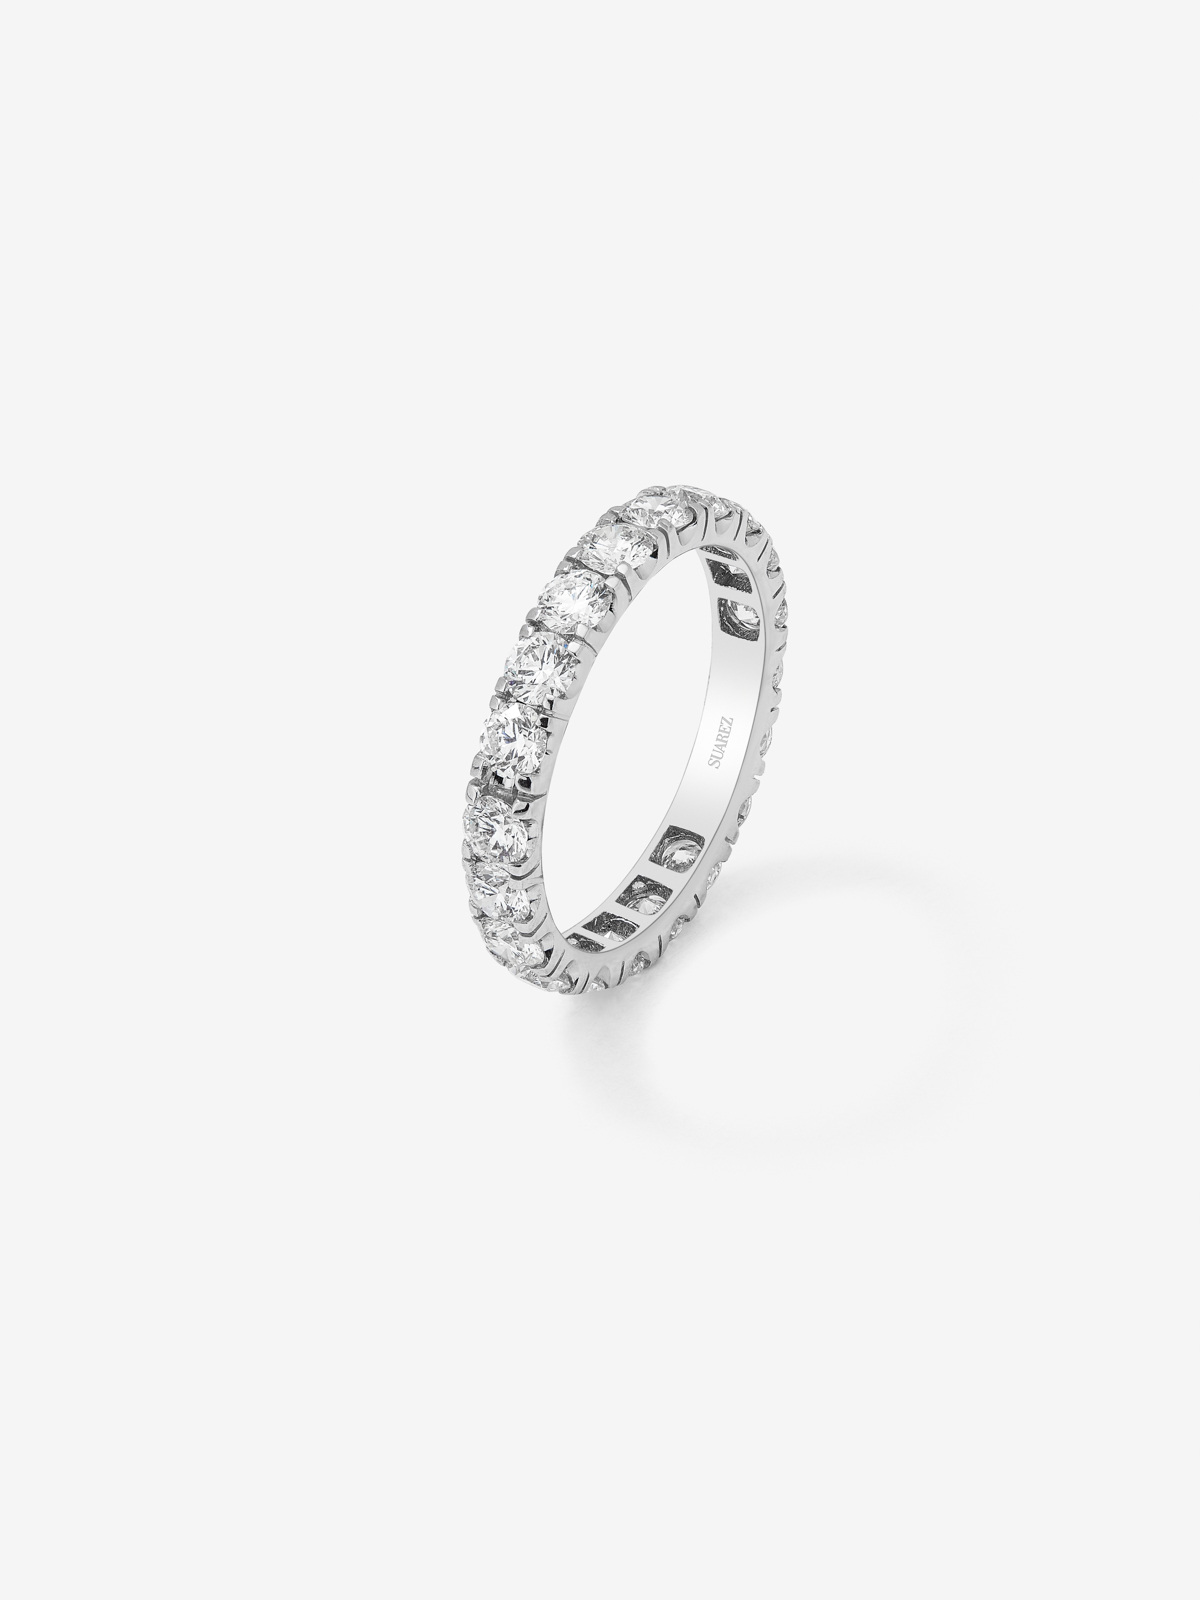 18K white gold full eternity engagement ring with claw-set diamonds.